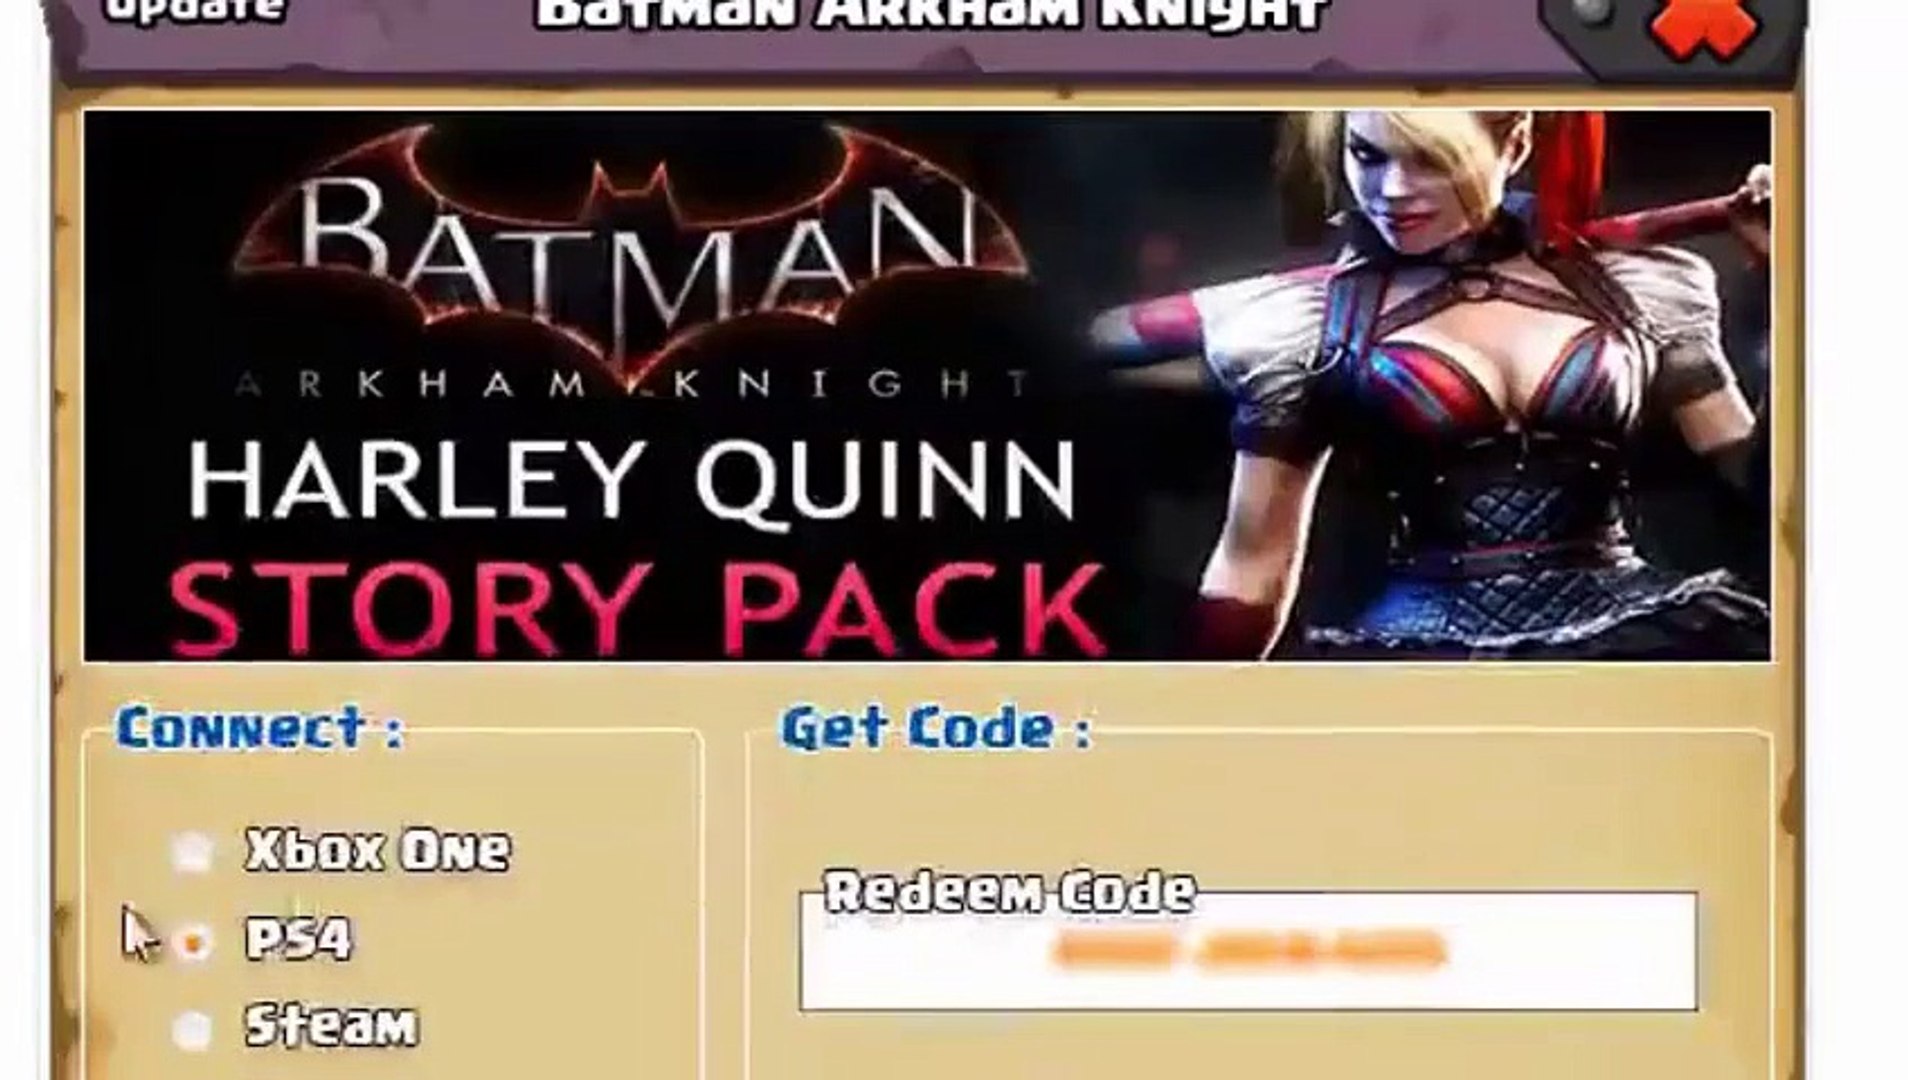 NEW FREE CODE 🔥 Heroes Online by @ArkhamDeluxe 🔥 FREE CODES give